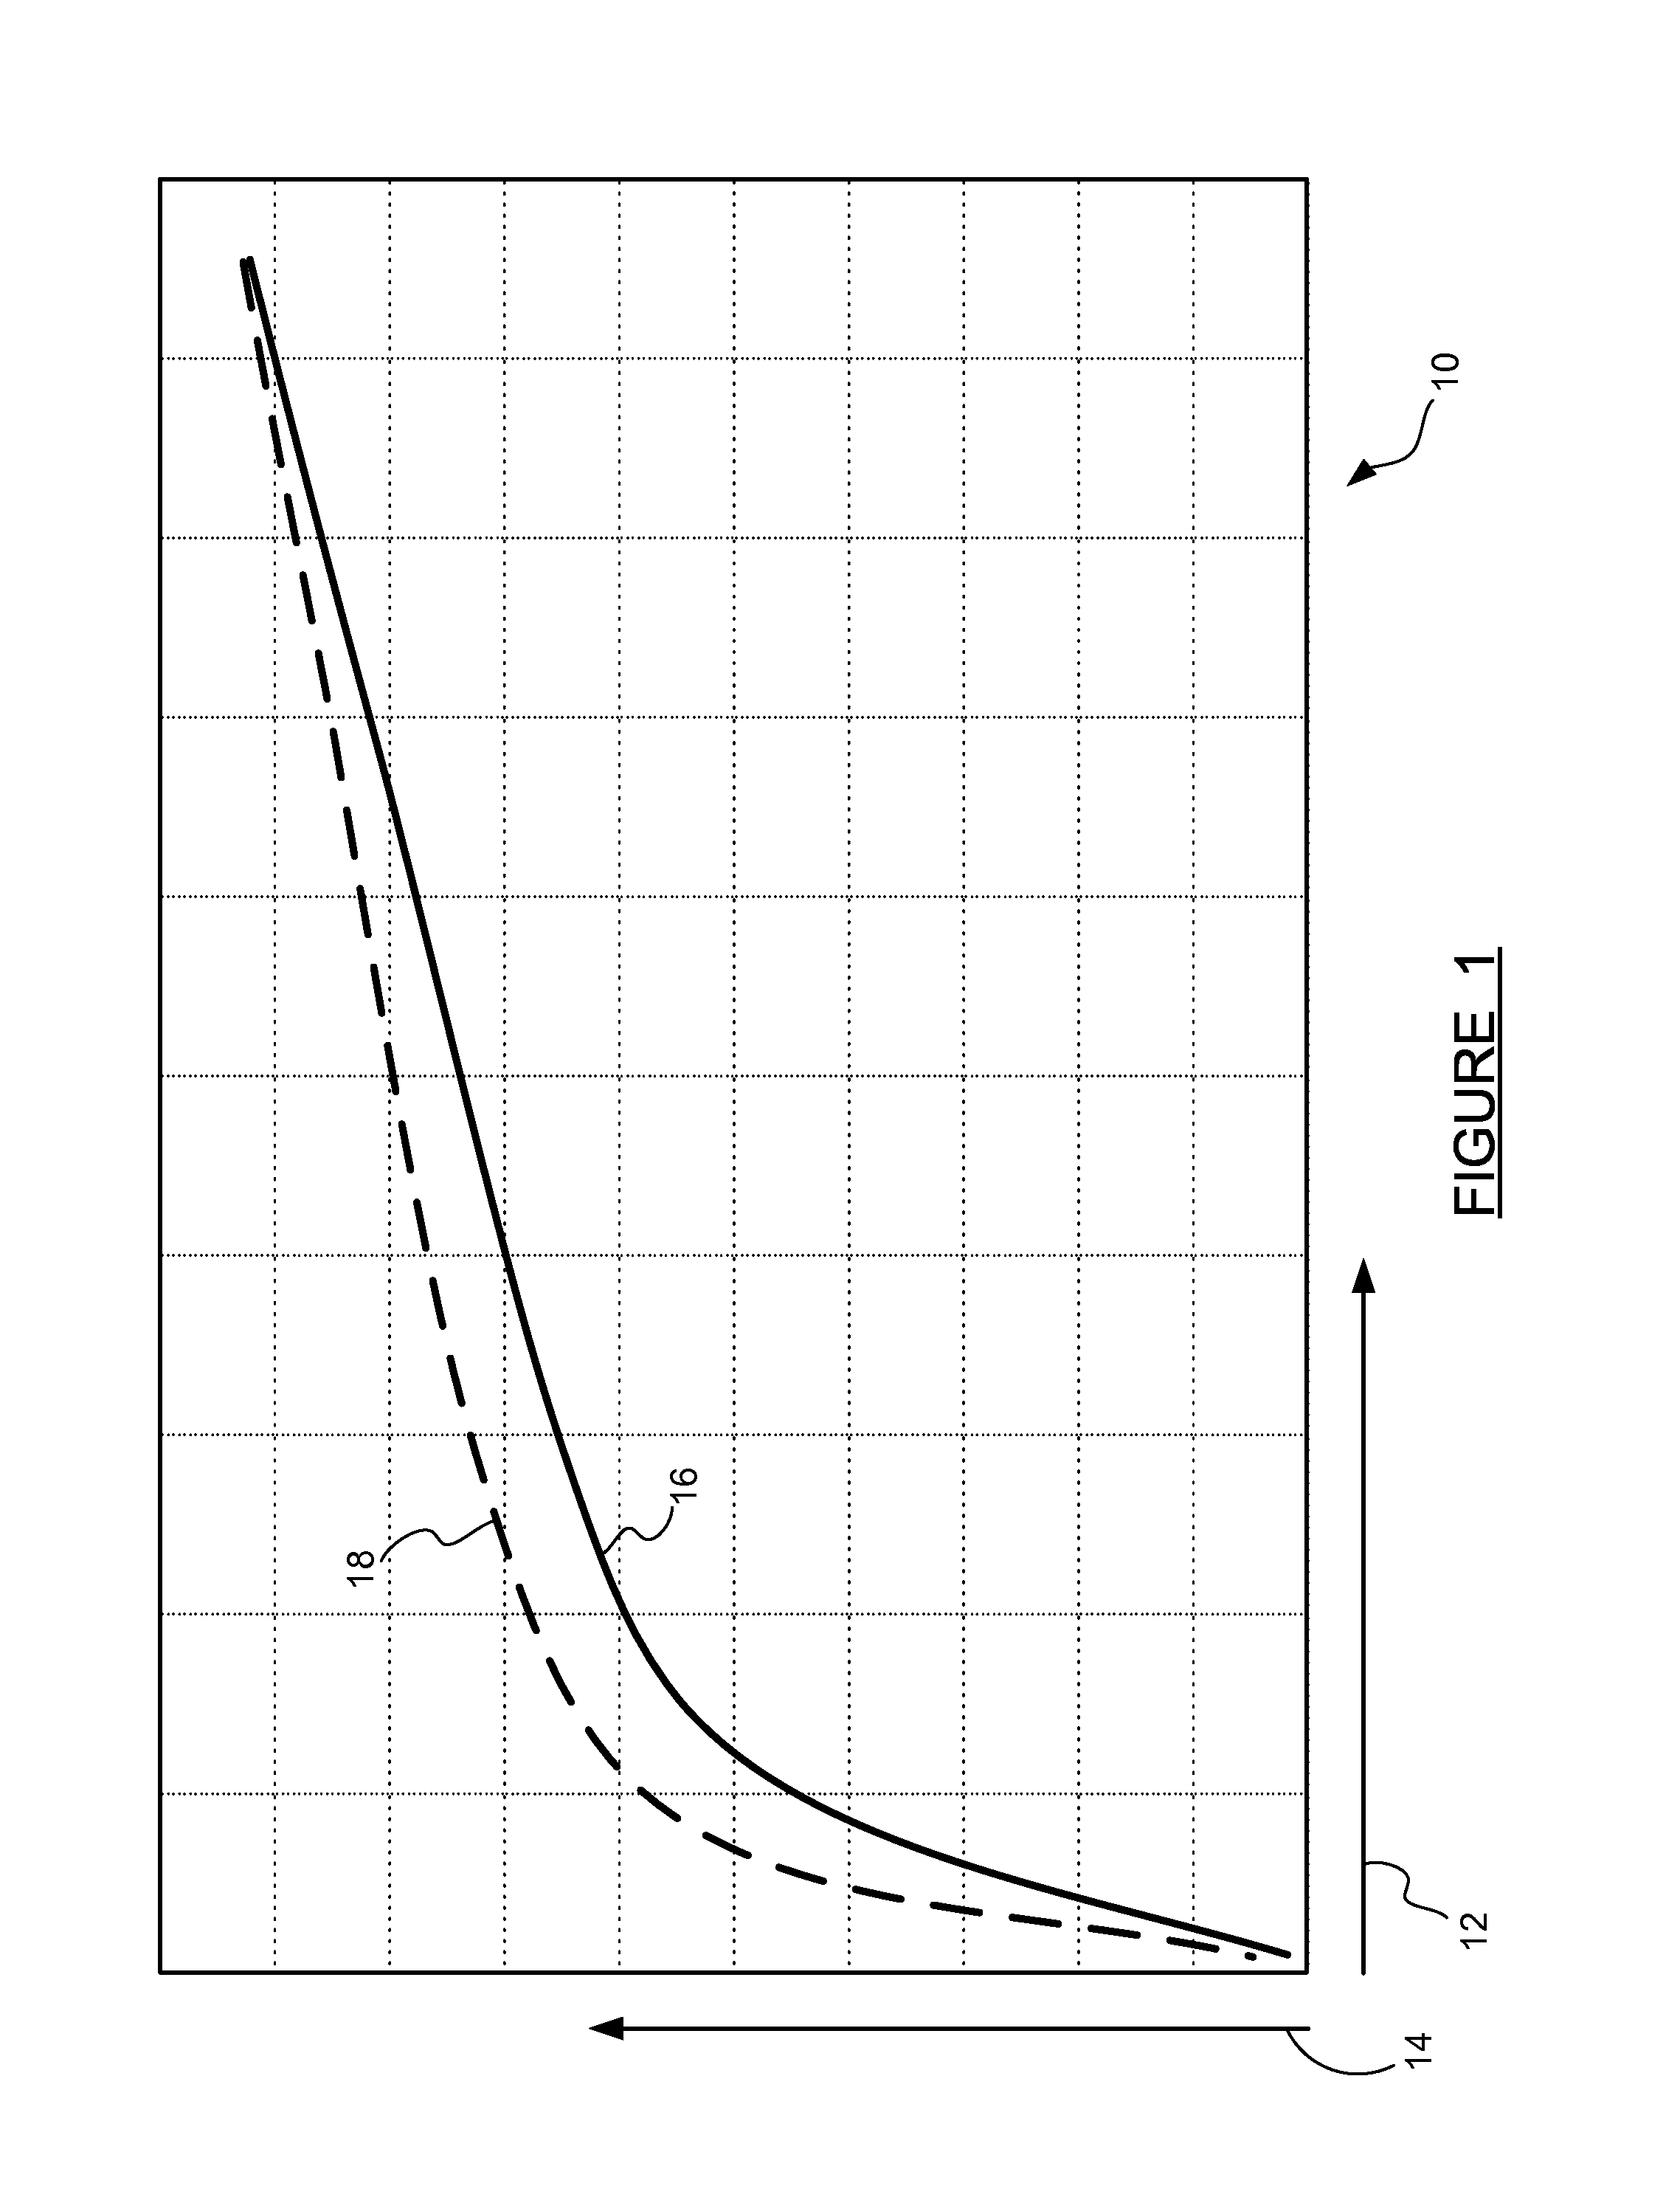 Method to detect open-circuit voltage shift through optimization fitting of the anode electrode half-cell voltage curve